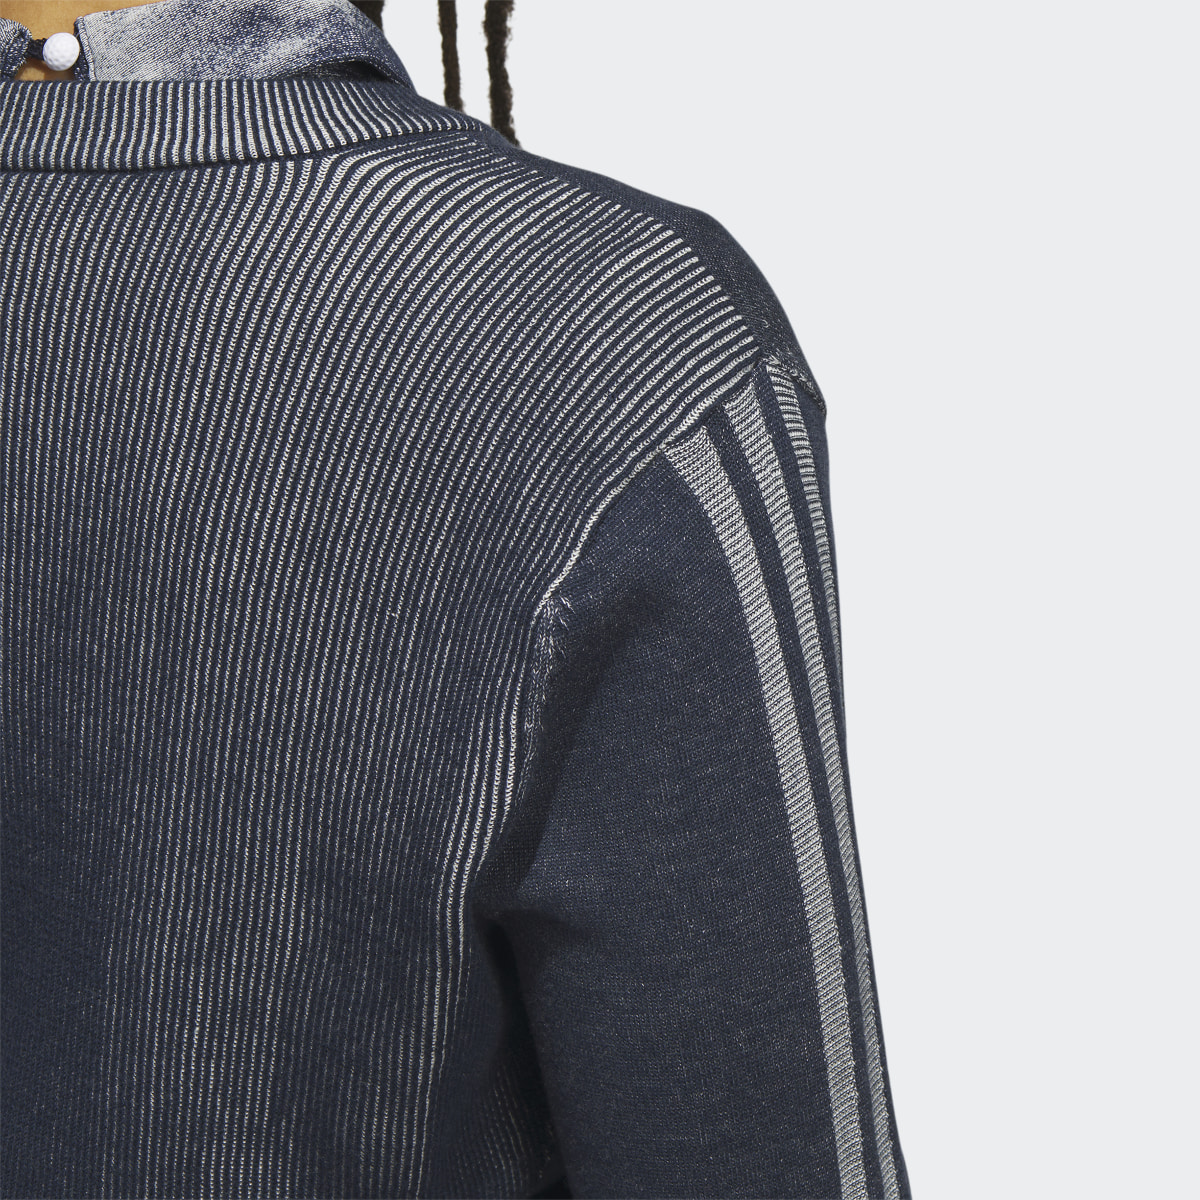 Adidas Made To Be Remade V-Neck Pullover Sweater. 8